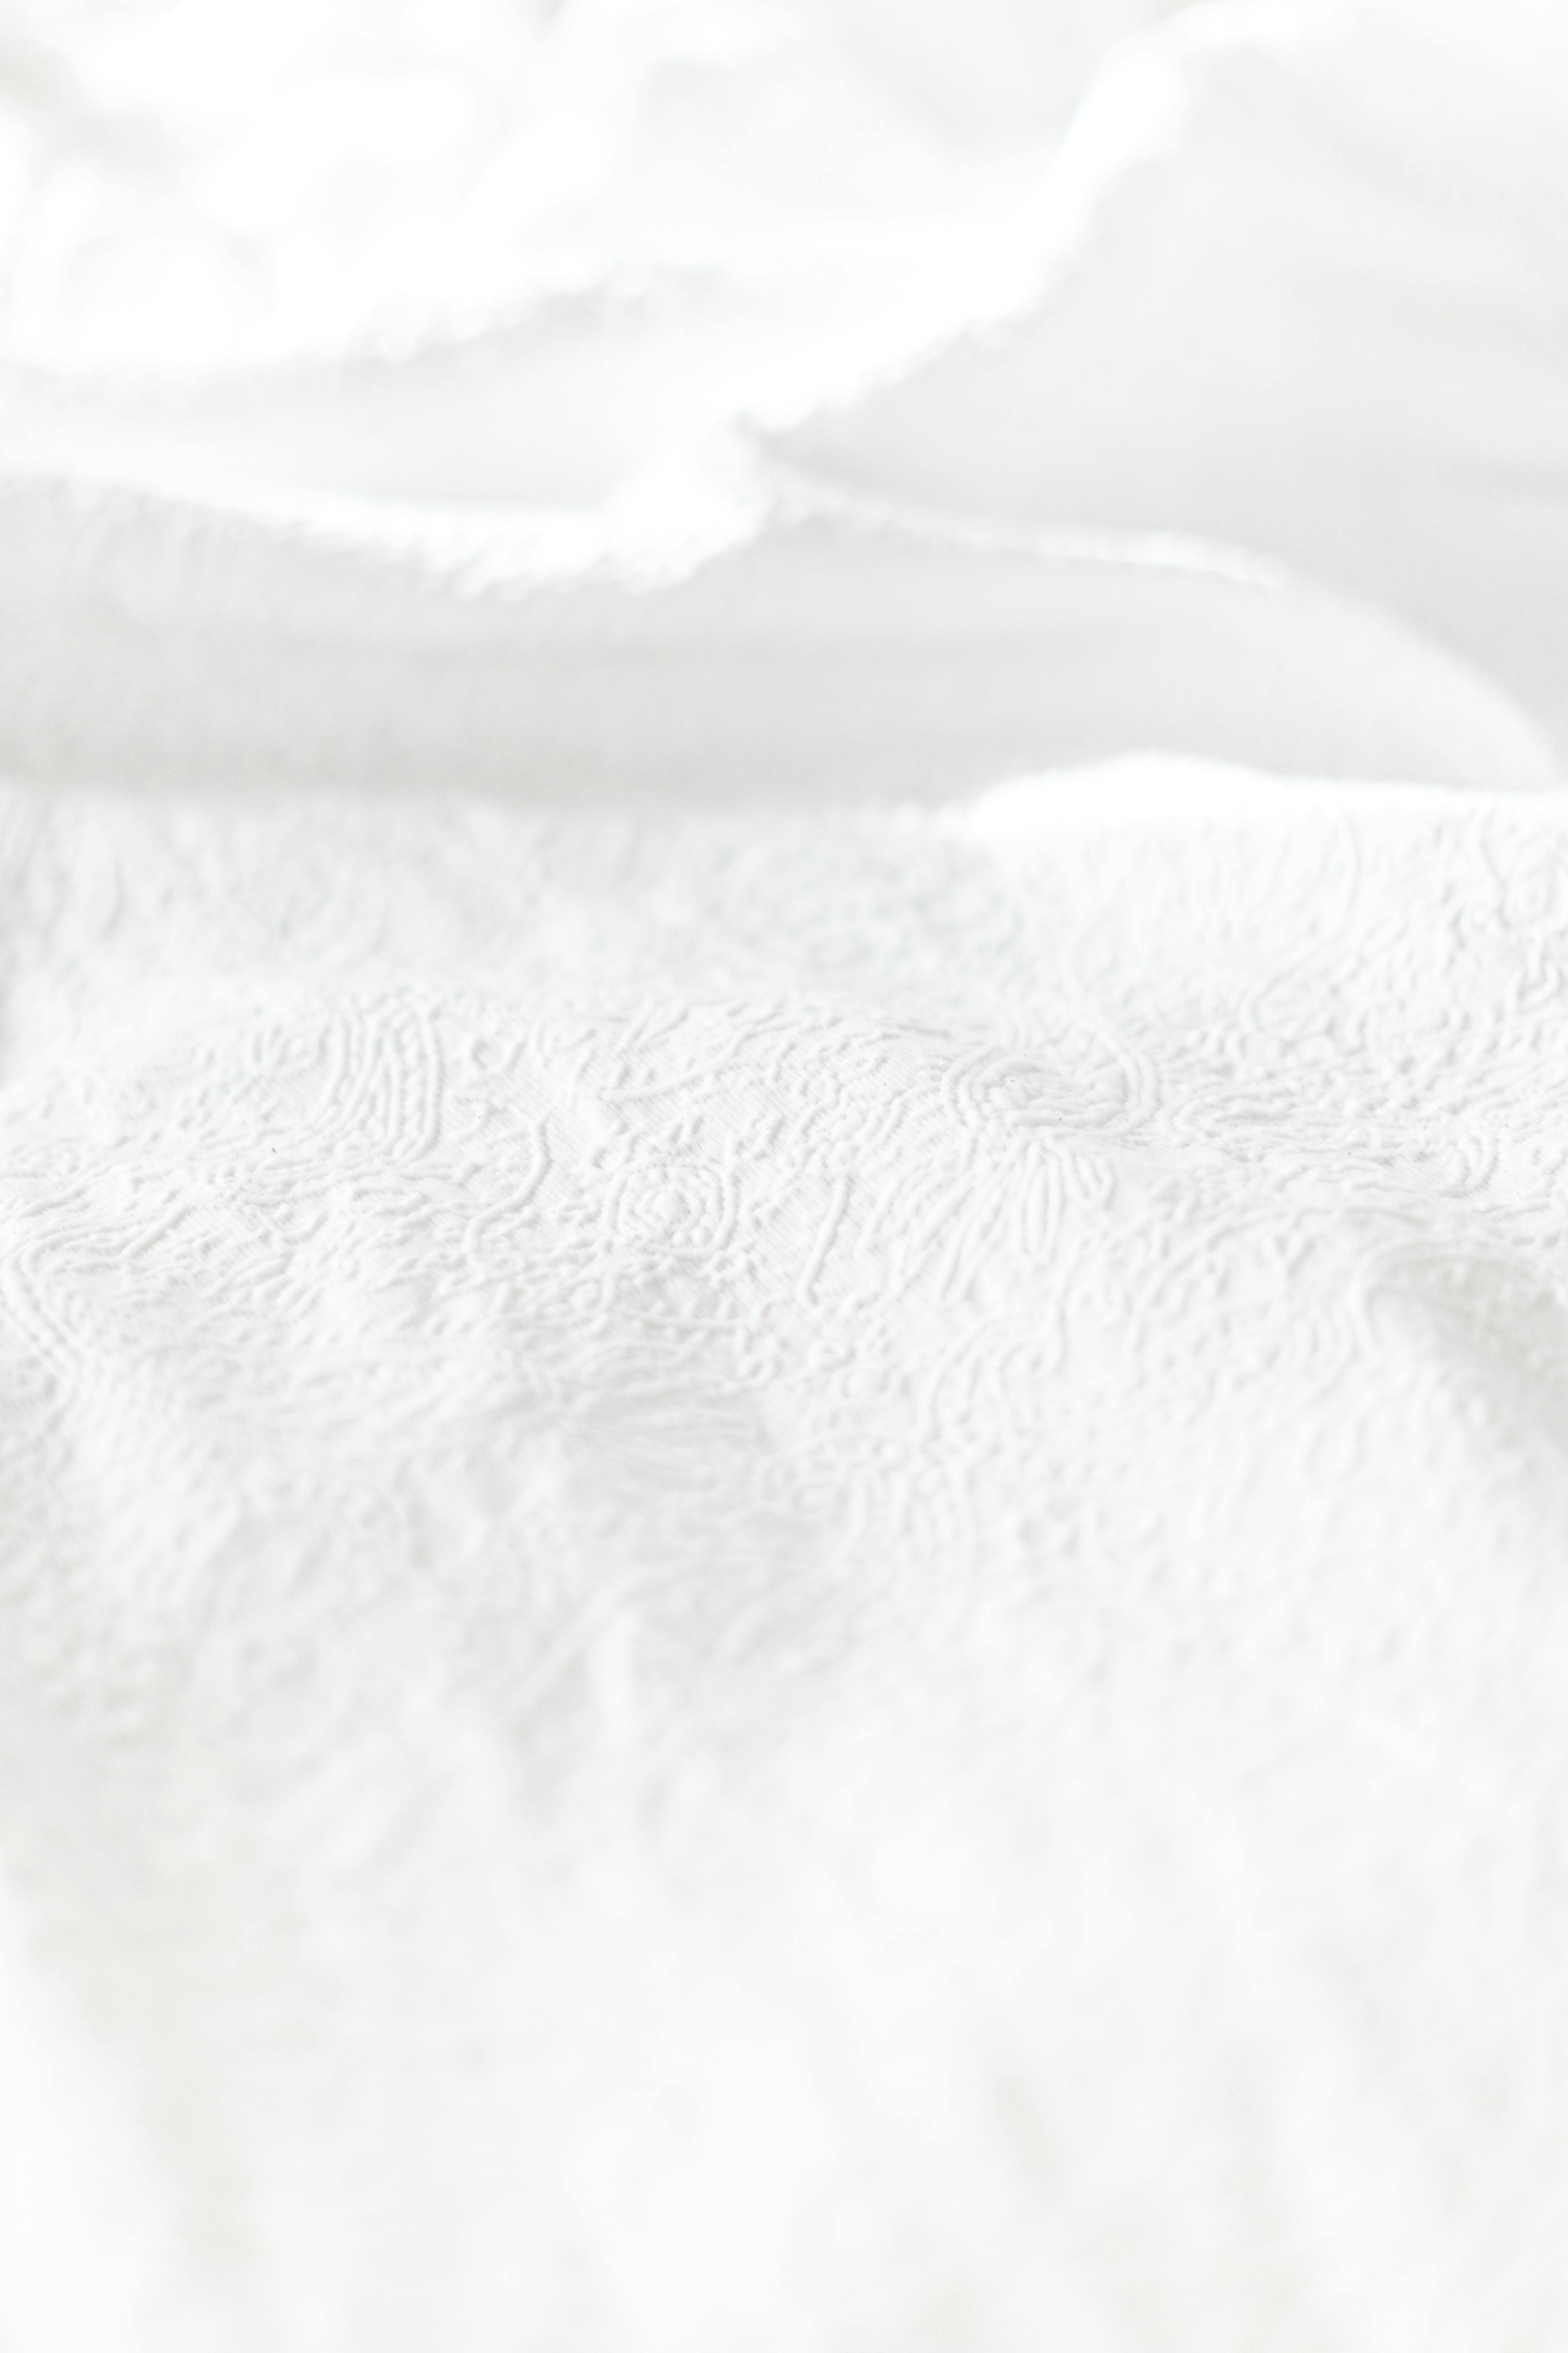 White Fabric Cloth Texture Stock Photo, Picture and Royalty Free Image.  Image 60310702.